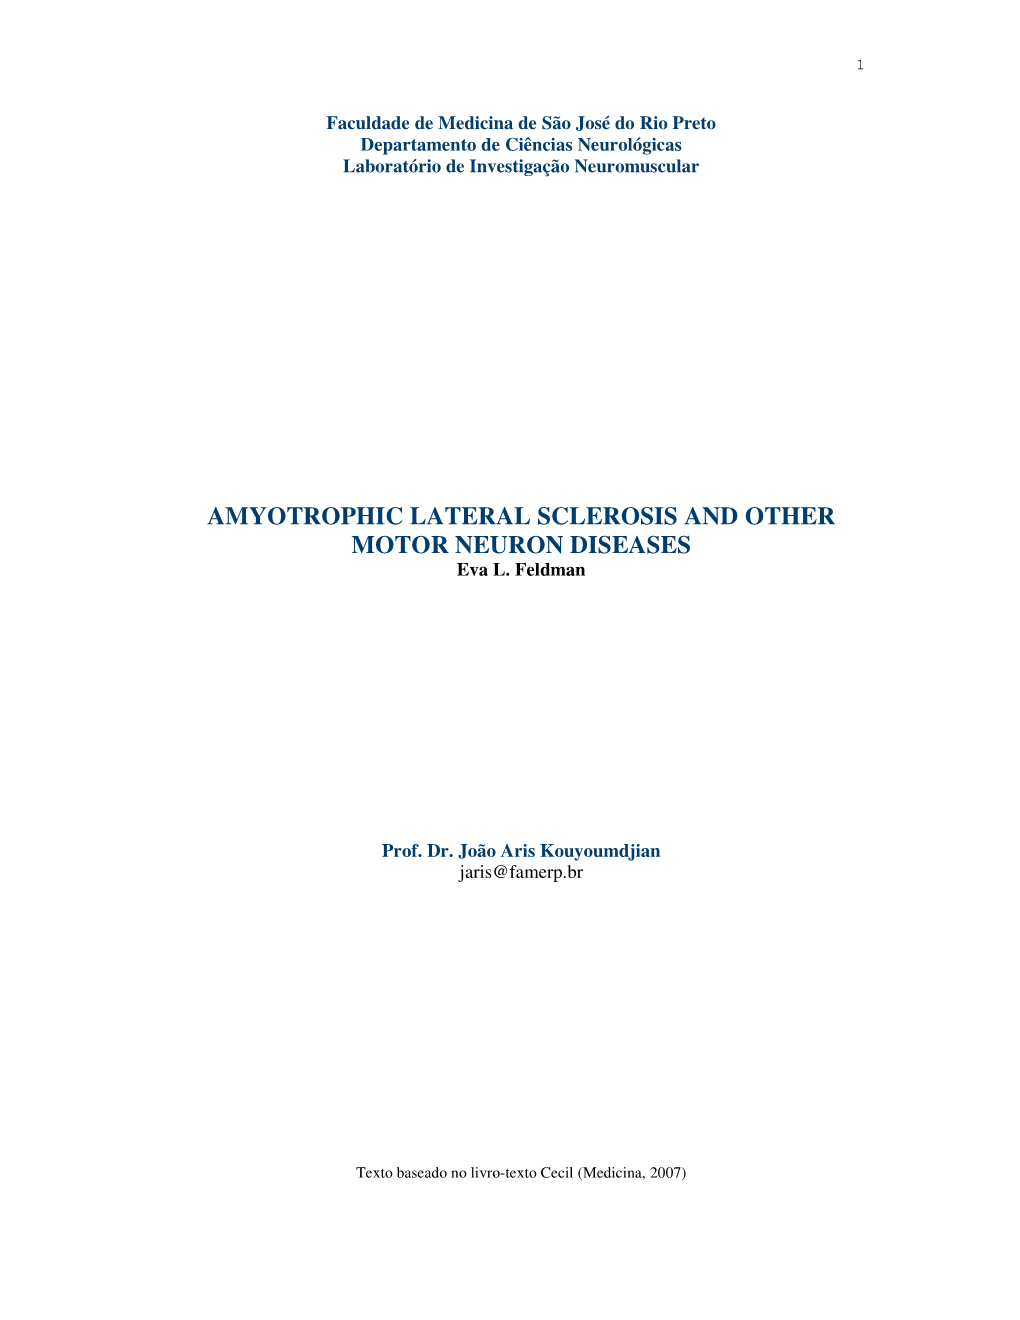 AMYOTROPHIC LATERAL SCLEROSIS and OTHER MOTOR NEURON DISEASES Eva L